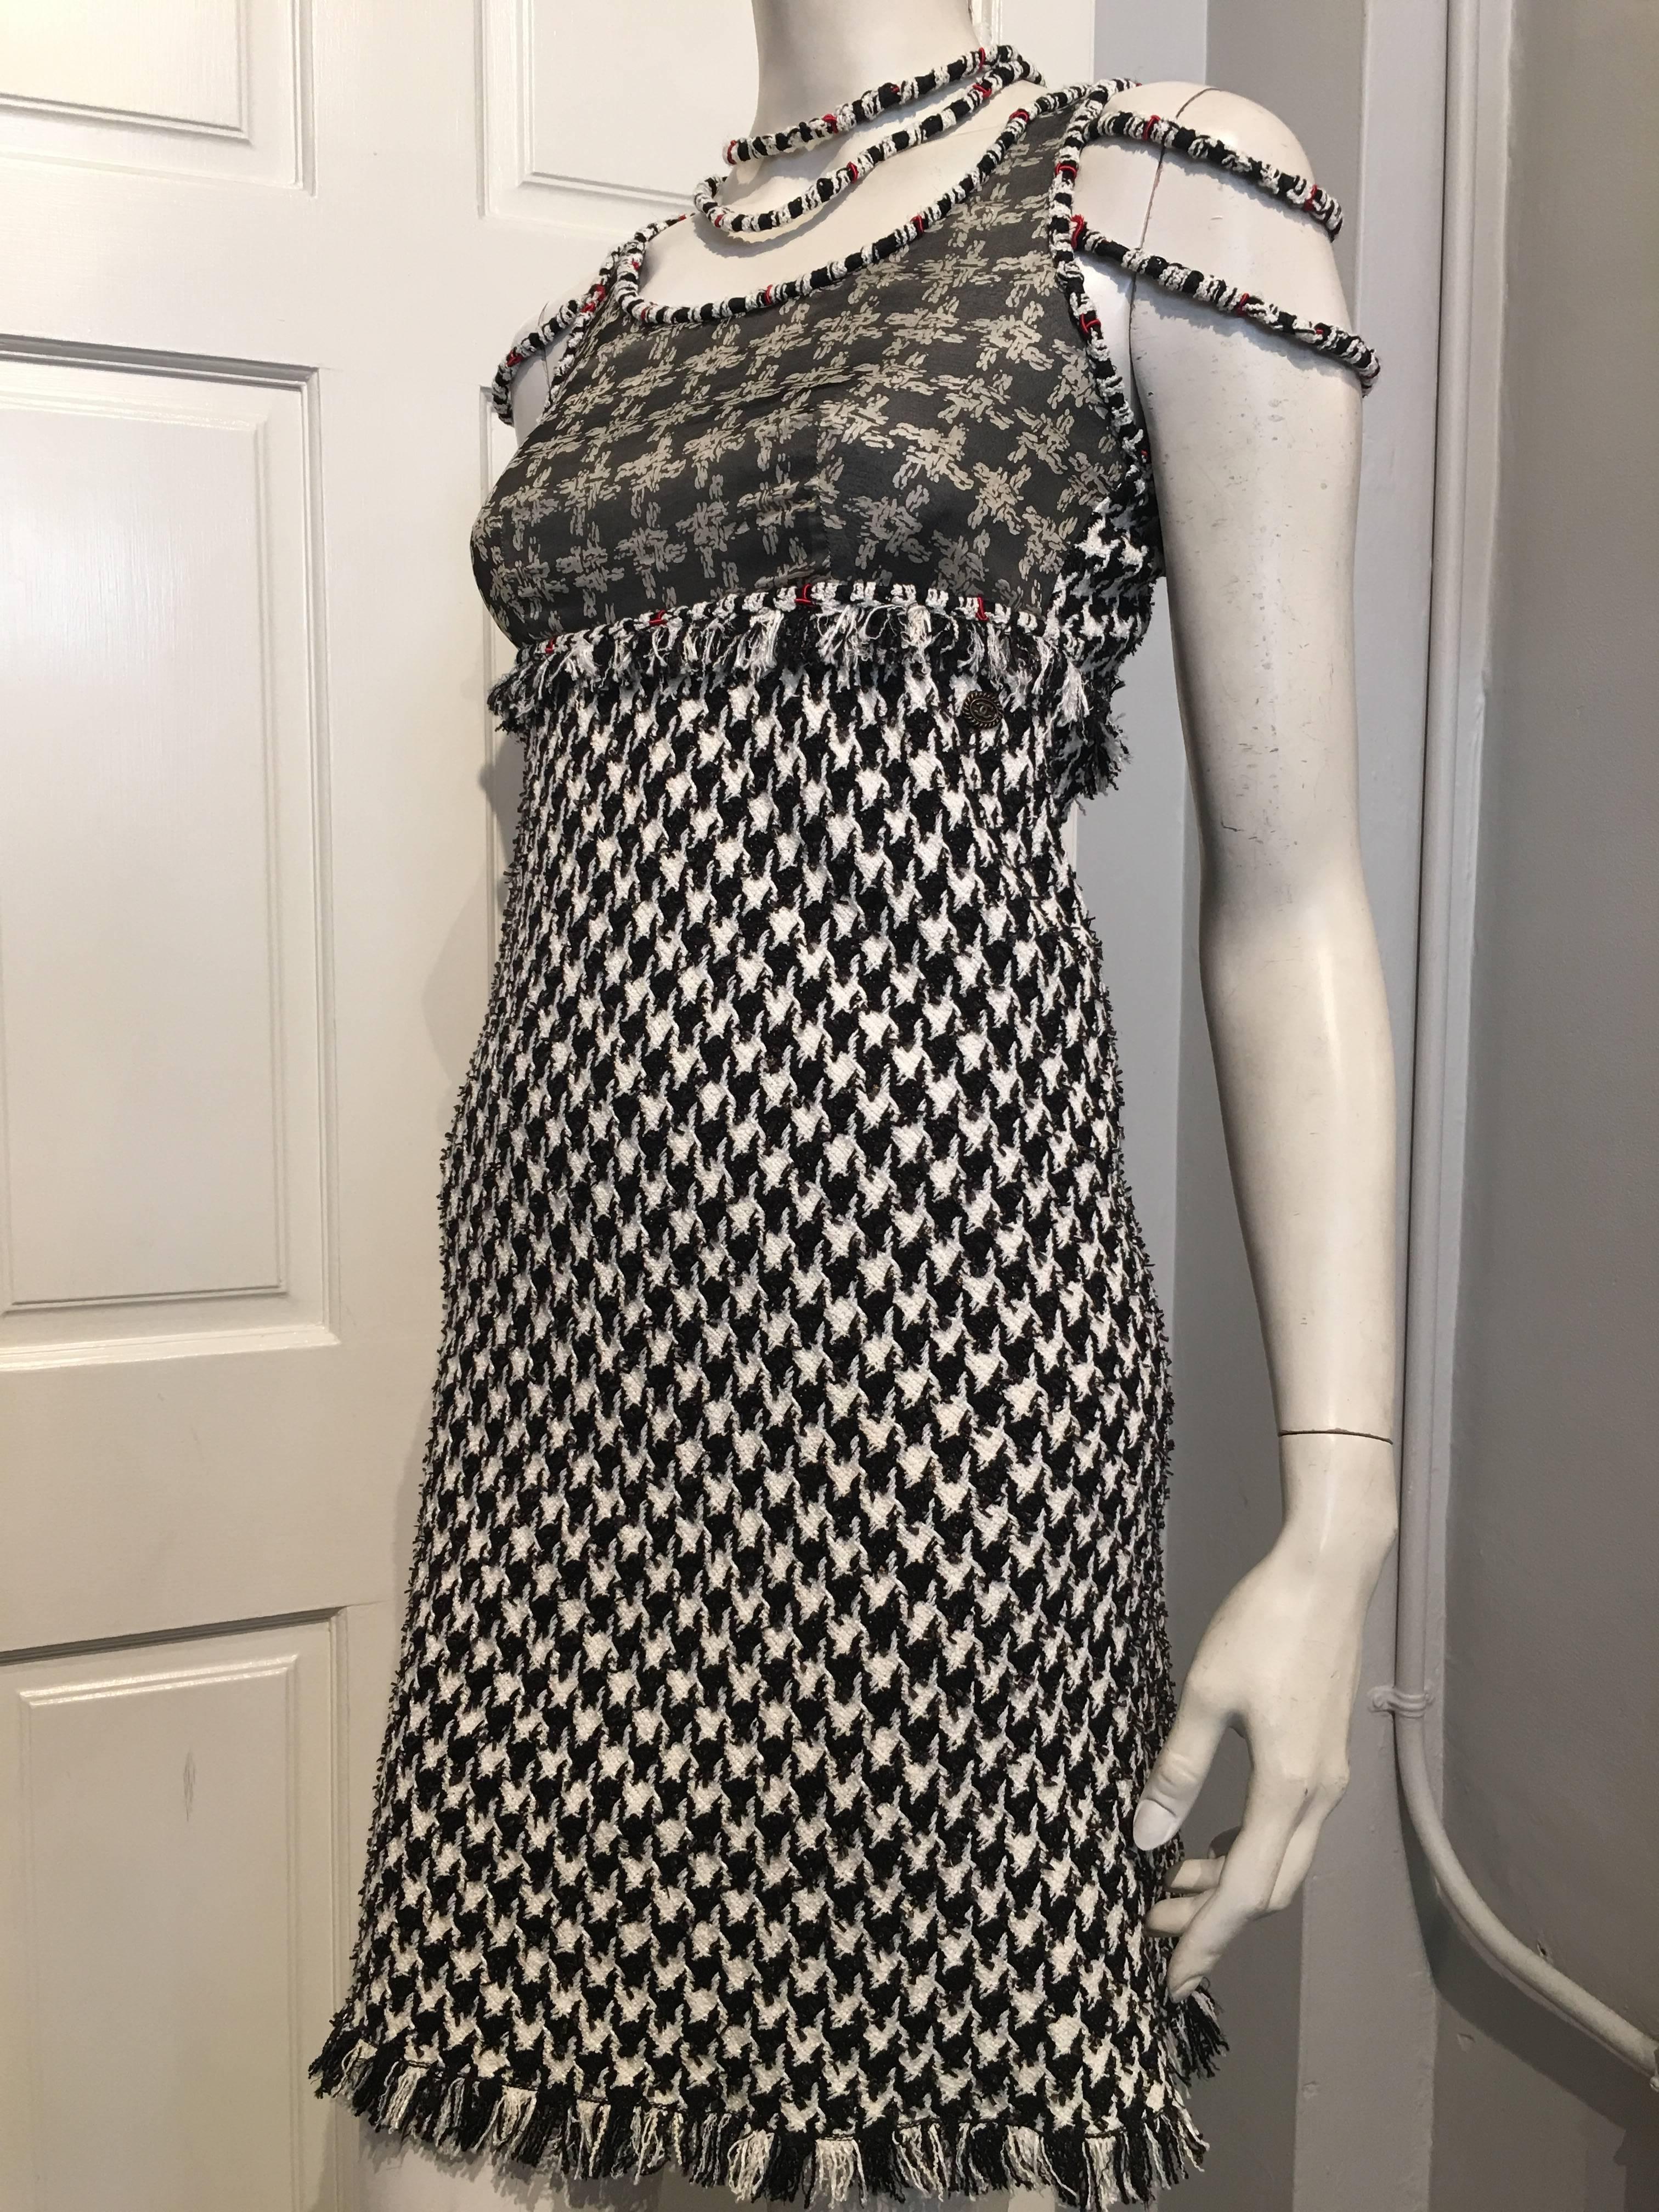 This Chanel dress features a hounds-tooth tweed, with a shear chiffon top printed to match. It is trimmed with woven bands in red, black and white, with matching choker type accent at the neck, and arm cuffs in the same woven fabric that hang just